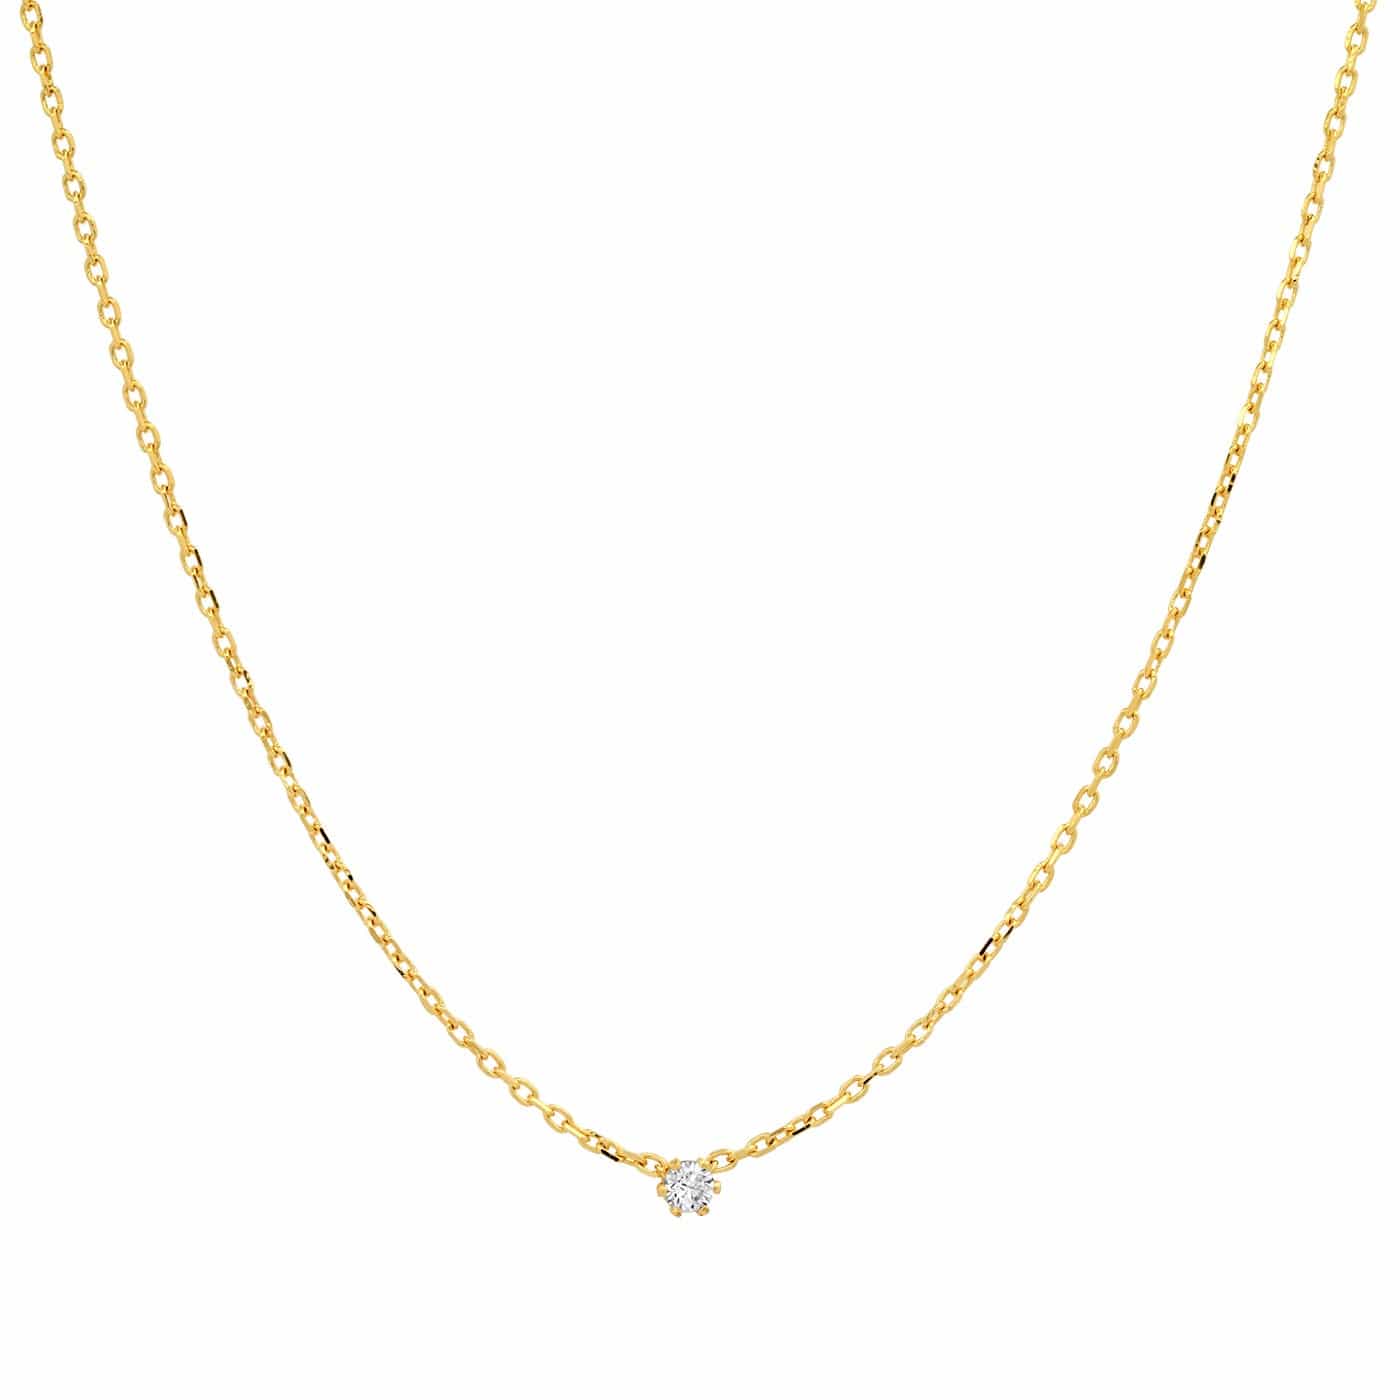 TAI JEWELRY Necklace Gold Vermeil Chain With Single CZ Accent